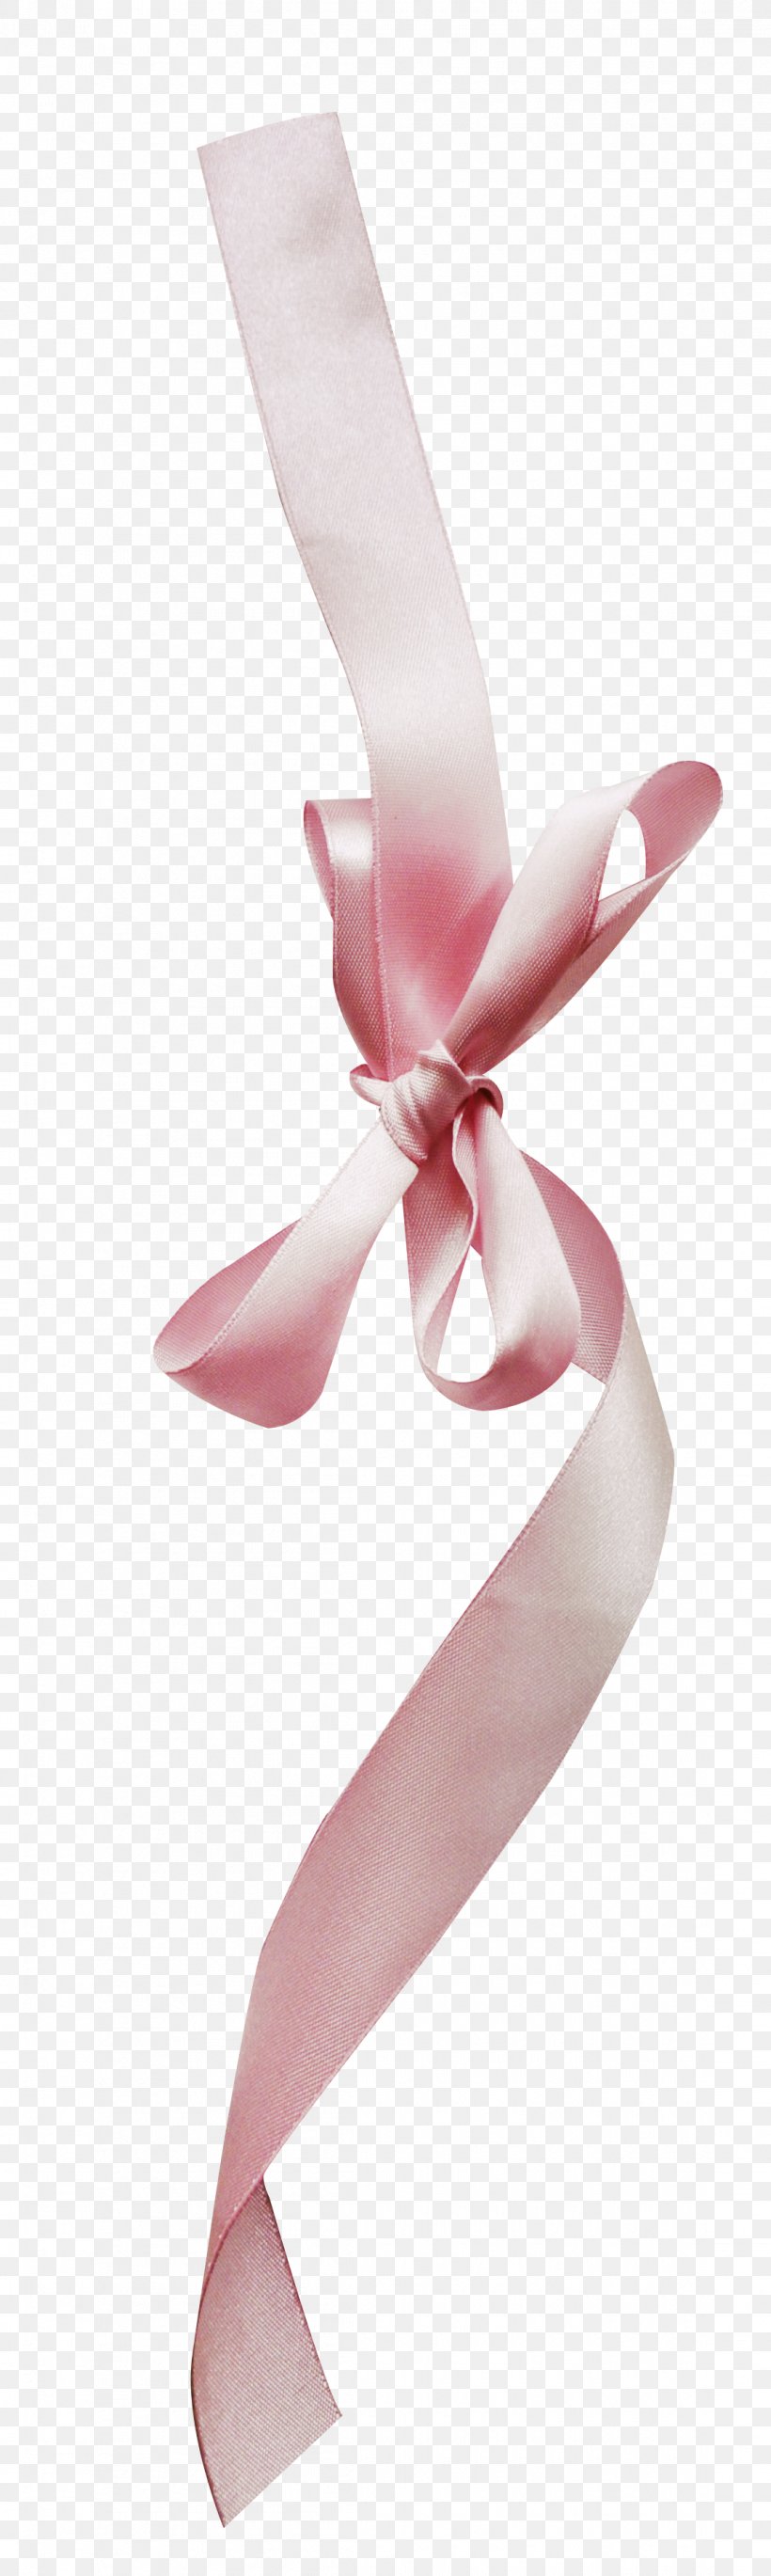 Pink Ribbon Pink Ribbon Shoelace Knot, PNG, 1110x3708px, Pink, Bow, Fashion Accessory, Google Images, Hand Download Free